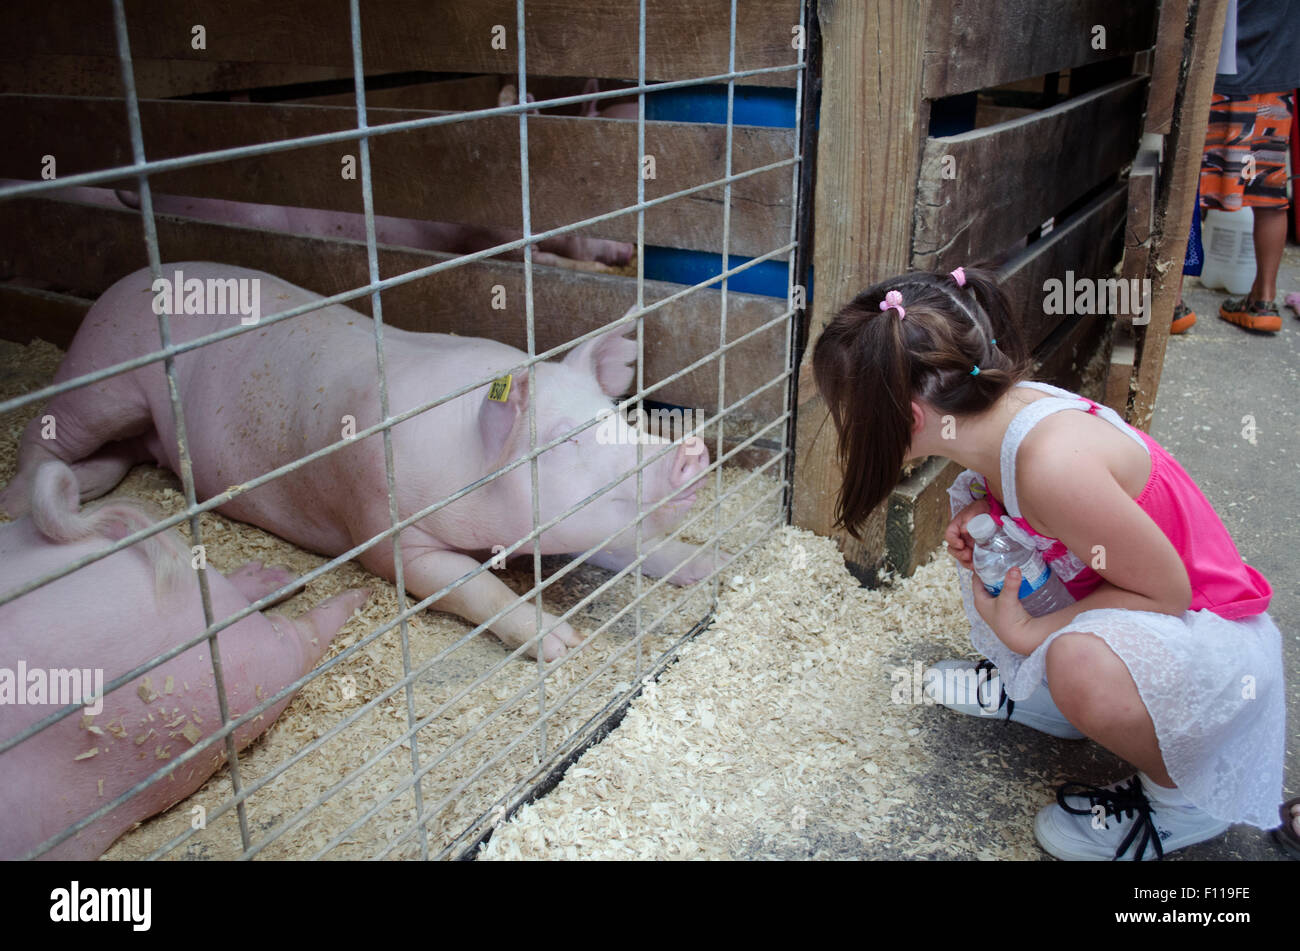 Small girl meets friendly pig at county fair livestock show Stock Photo